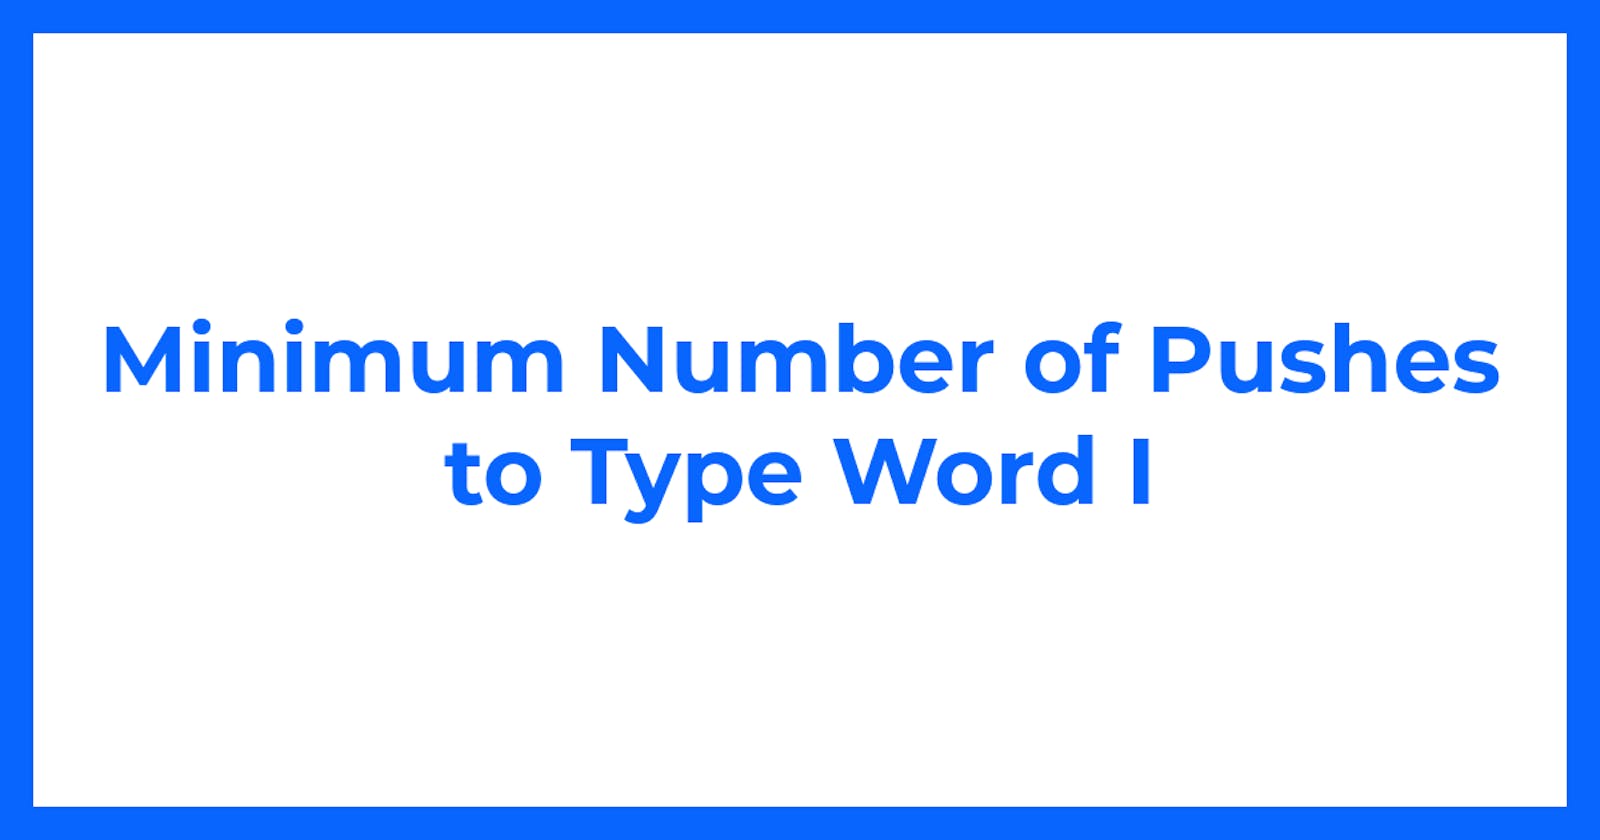 Minimum Number of Pushes to Type Word I